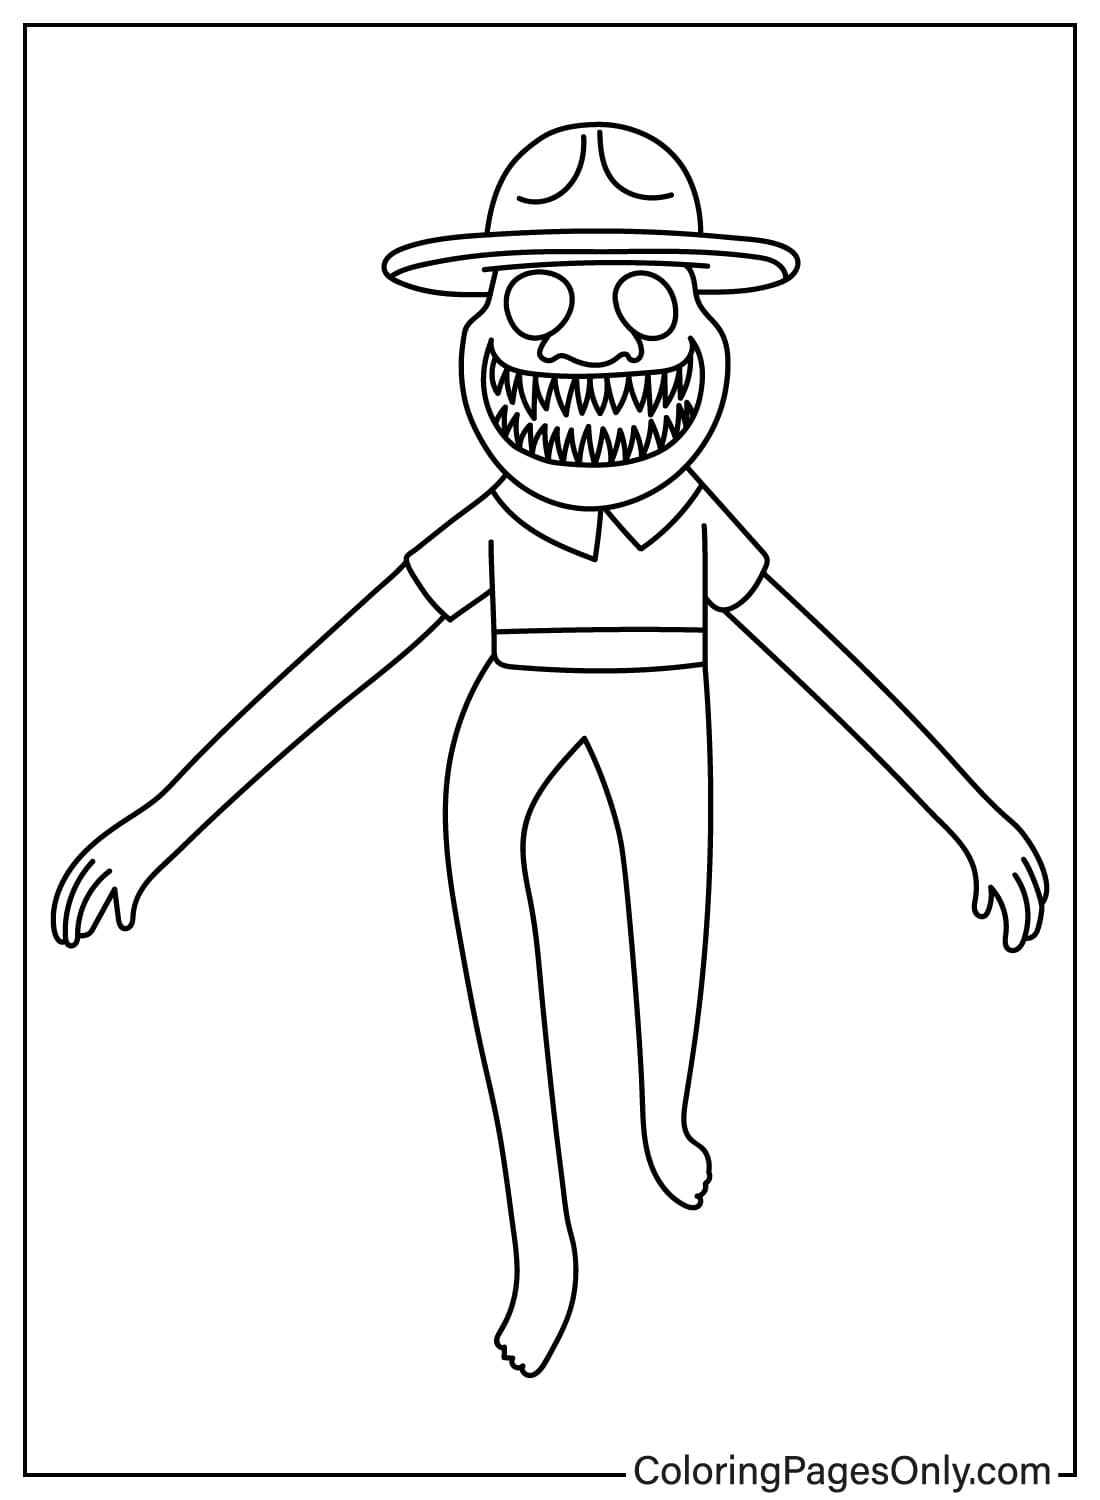 Zoonomaly Coloring Page to Print from Zoonomaly